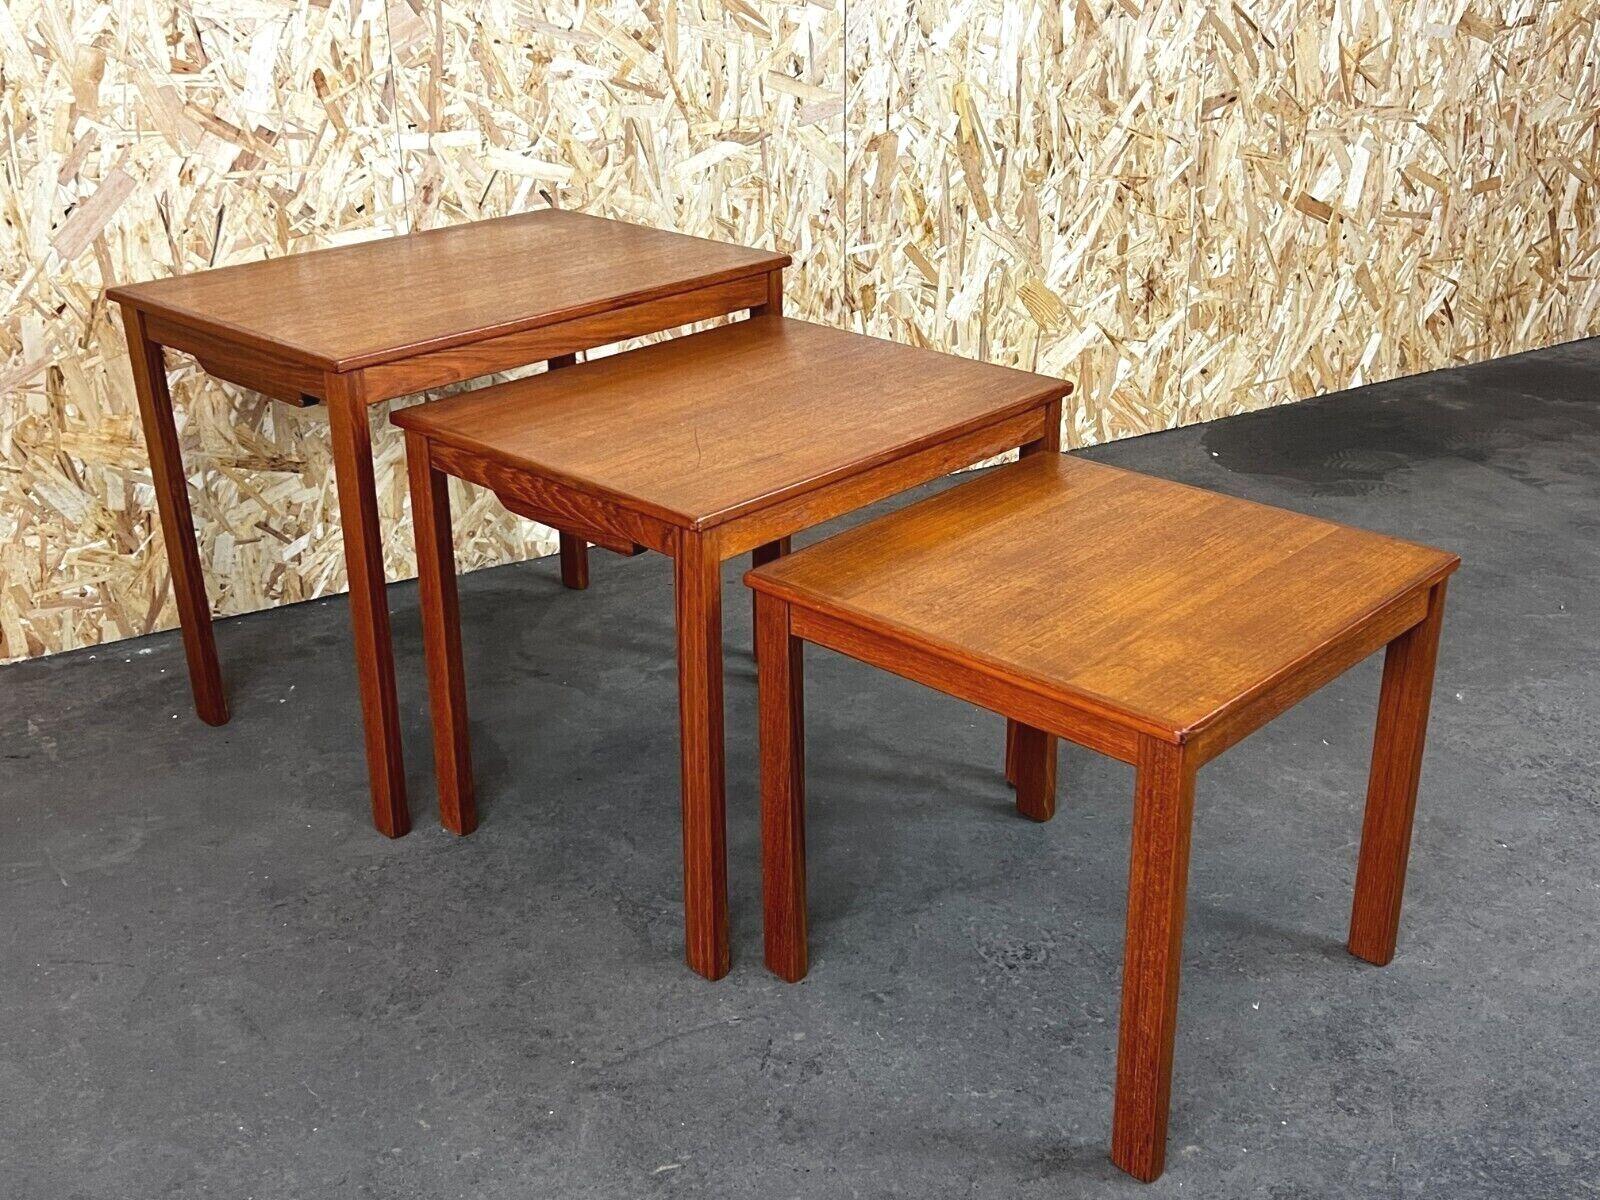 60s 70s teak nesting tables side tables Danish Modern 60s

Object: side tables

Manufacturer: Imha

Condition: good - vintage

Age: around 1960-1970

Dimensions:

58.5cm x 40.5cm x 49.5cm

Other notes:

The pictures serve as part of